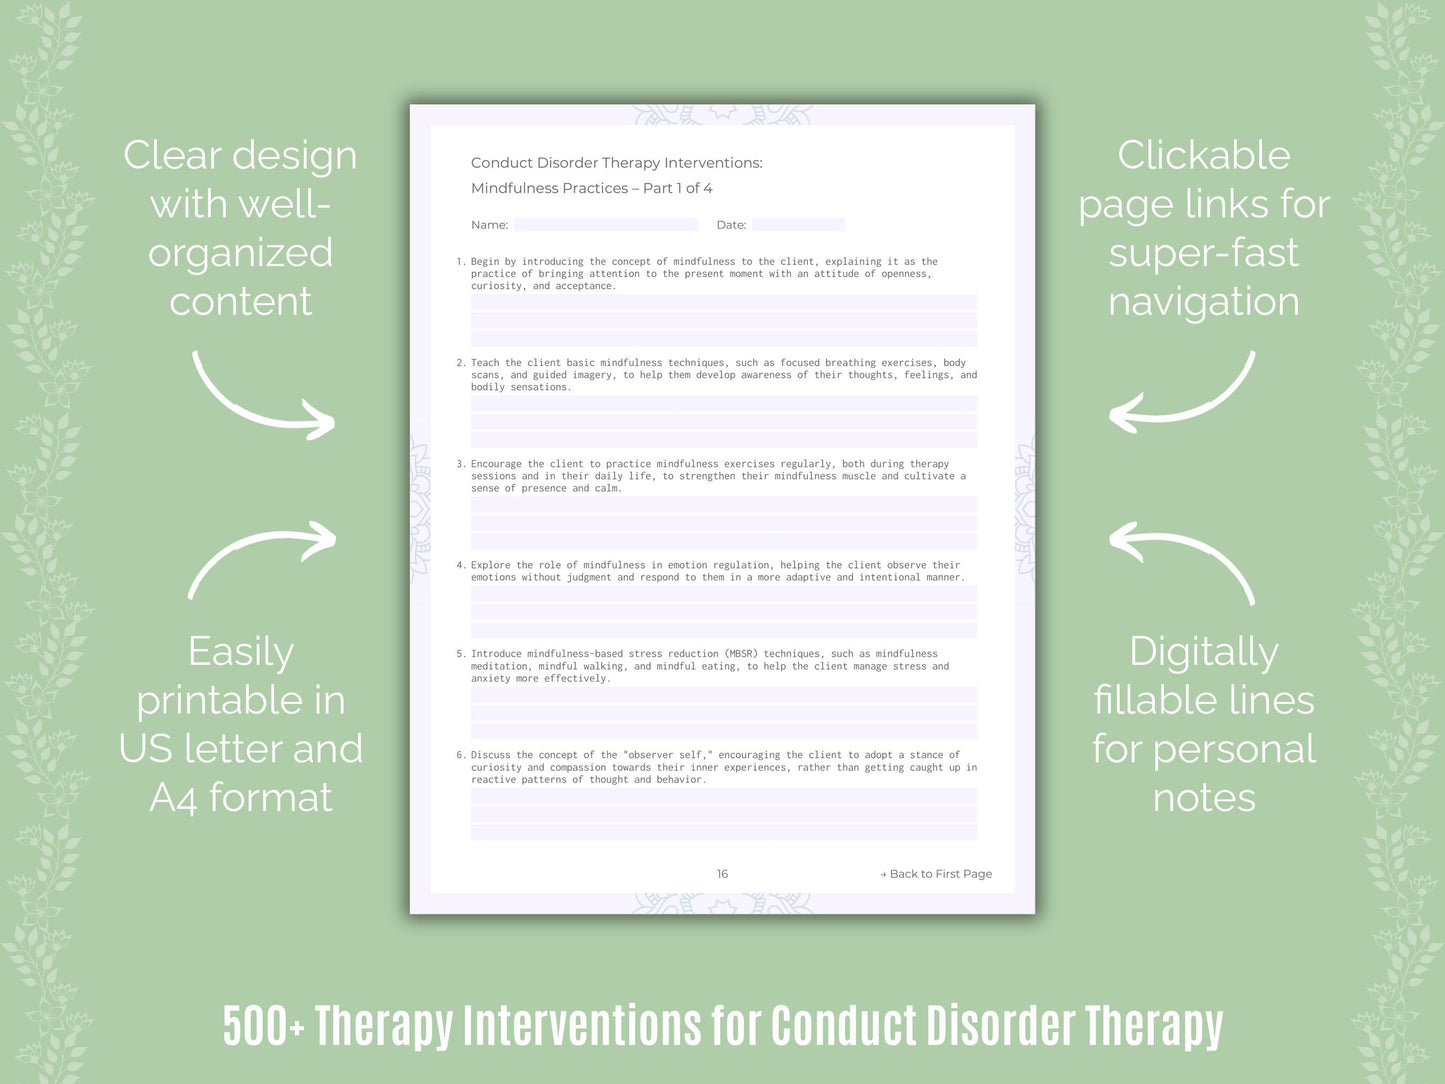 Conduct Disorder Therapy Interventions